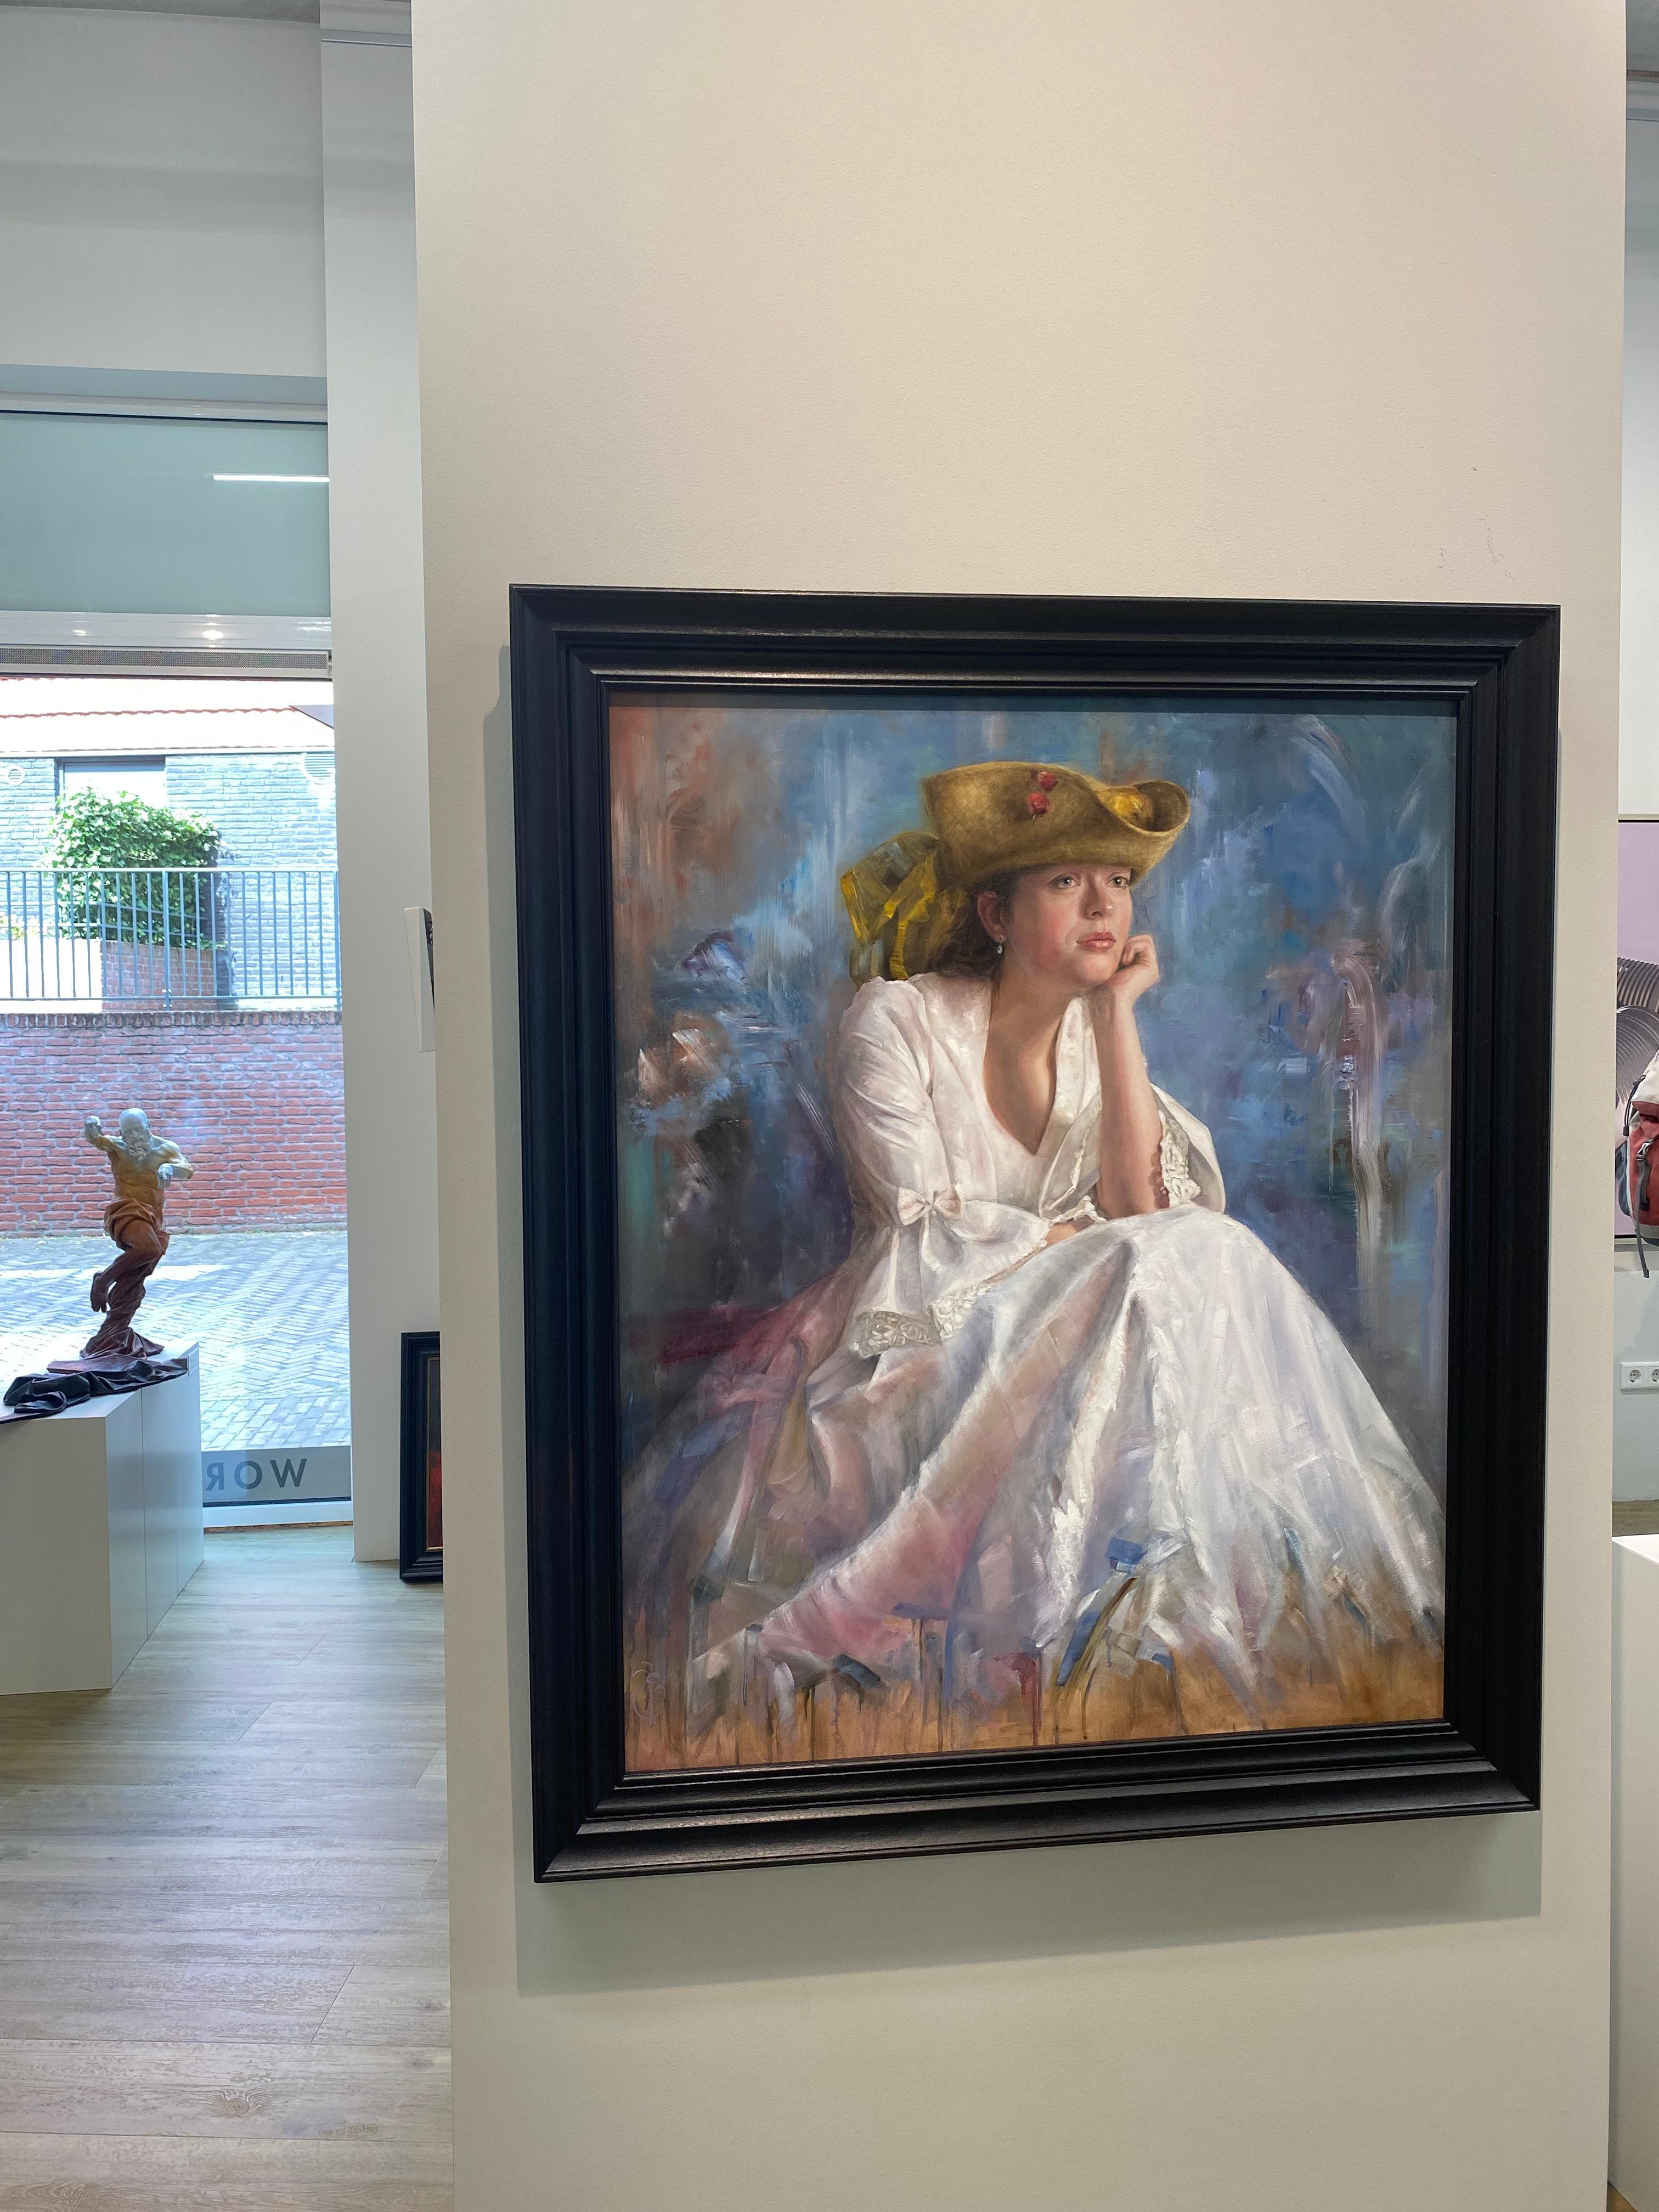 Dutch artist Liseth Visser is no stranger to the world of portraiture. In the past she was nominated for the 'BP portrait award' from 'Th National Portrait Gallery' in London, and she was also seen on Dutch Television at 'Sterren op het Doek'. On